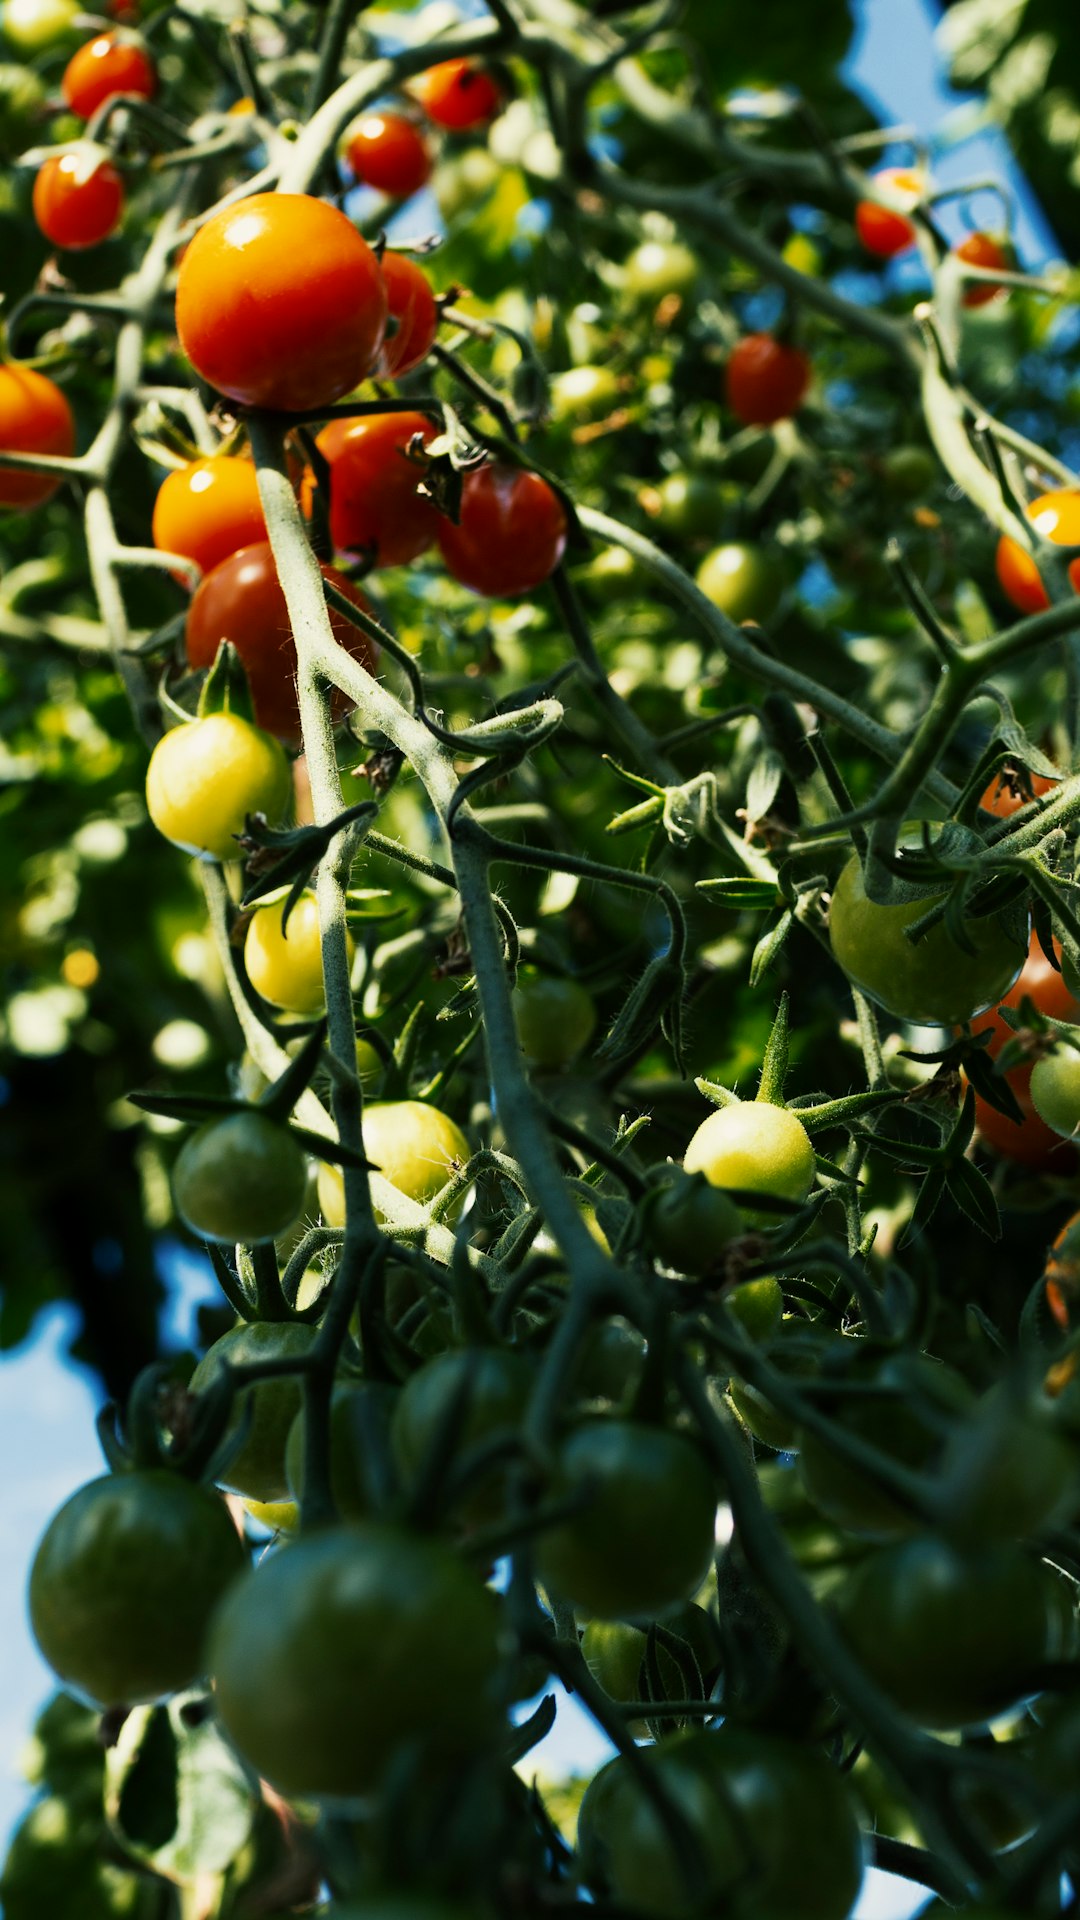 cherry tomatoes on the vine, green and ripe - How To Grow A Tomato Plant That Bears Tomatoes